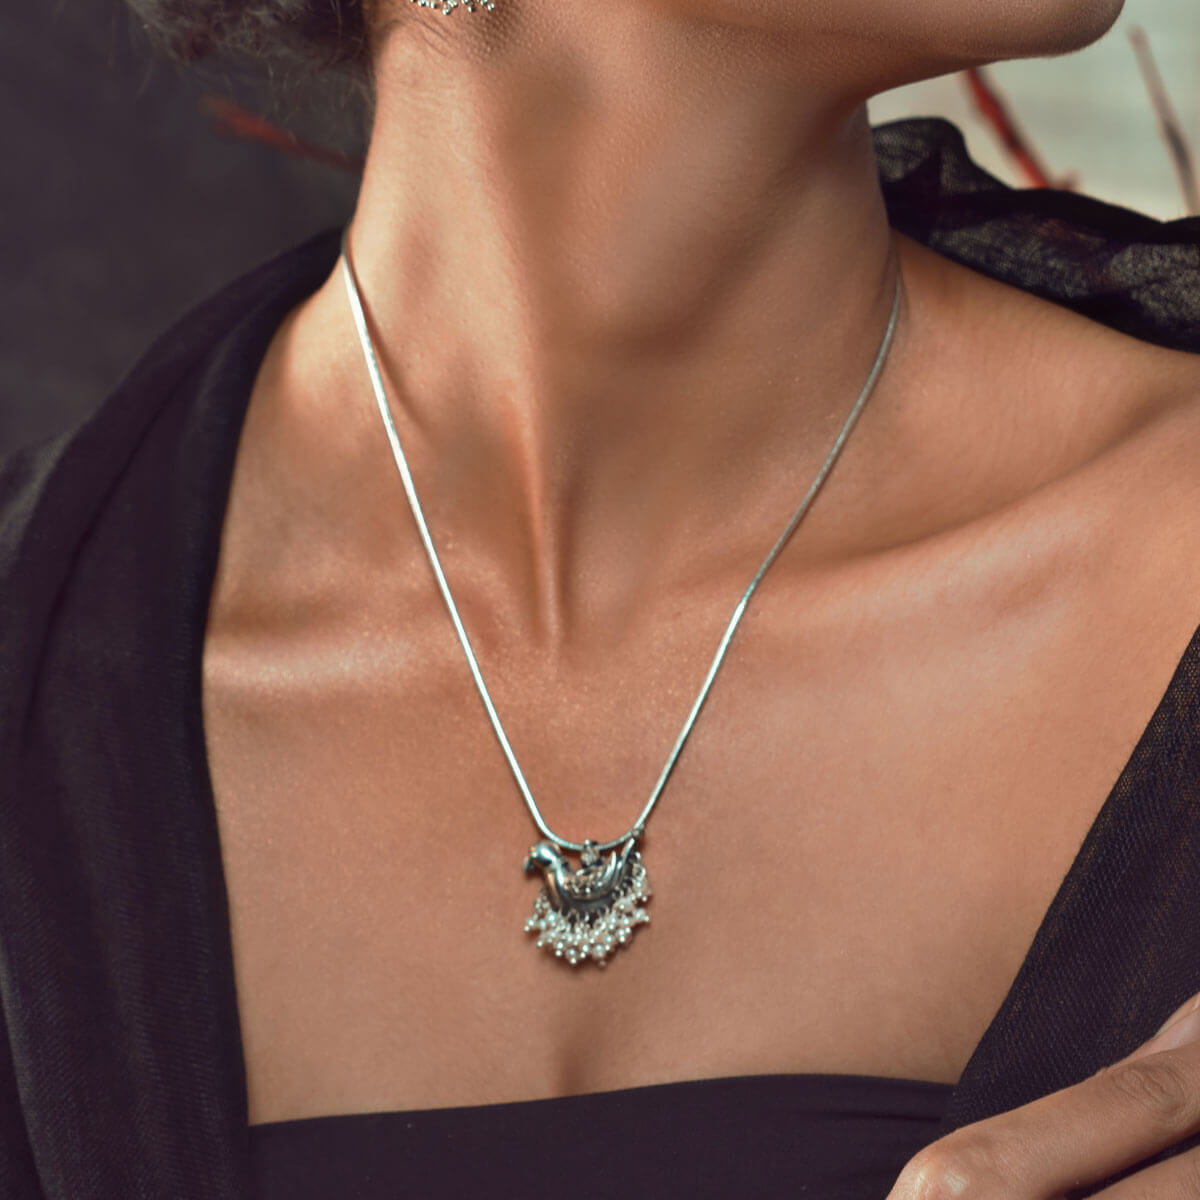 Shuk Sarika Sliver Pendant With Chain Necklace.